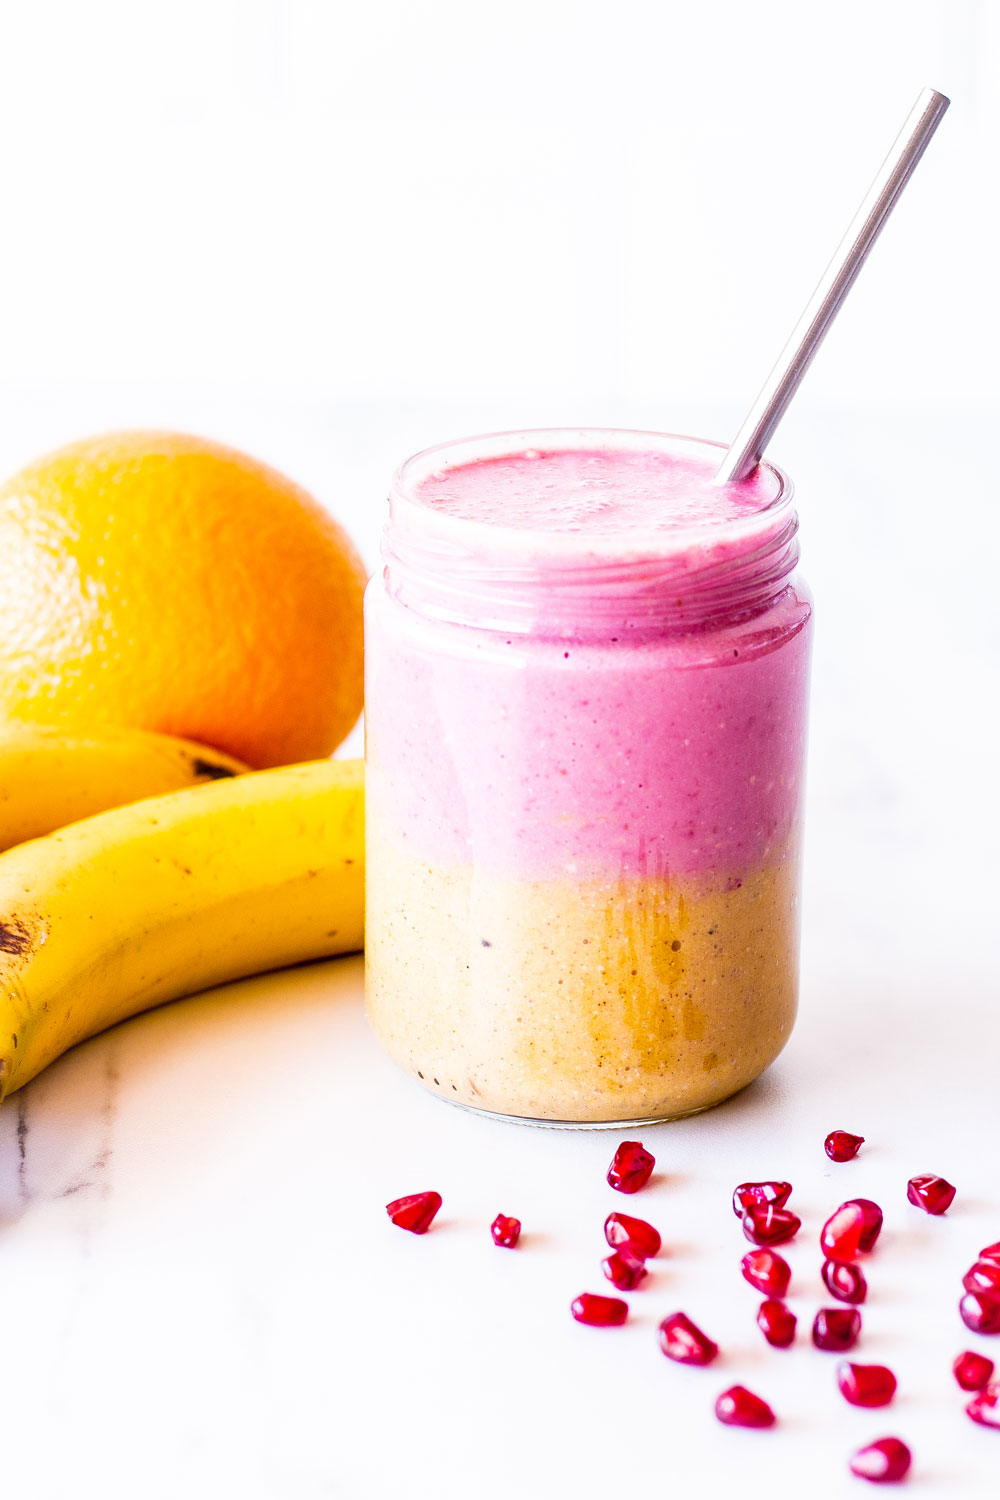 This Ginger & Pomegranate Immunity Booster Smoothie is a beautiful and healthy breakfast recipe that can help give your immune system a boost, especially during flu season. https://www.spotebi.com/recipes/ginger-pomegranate-immunity-booster-smoothie/